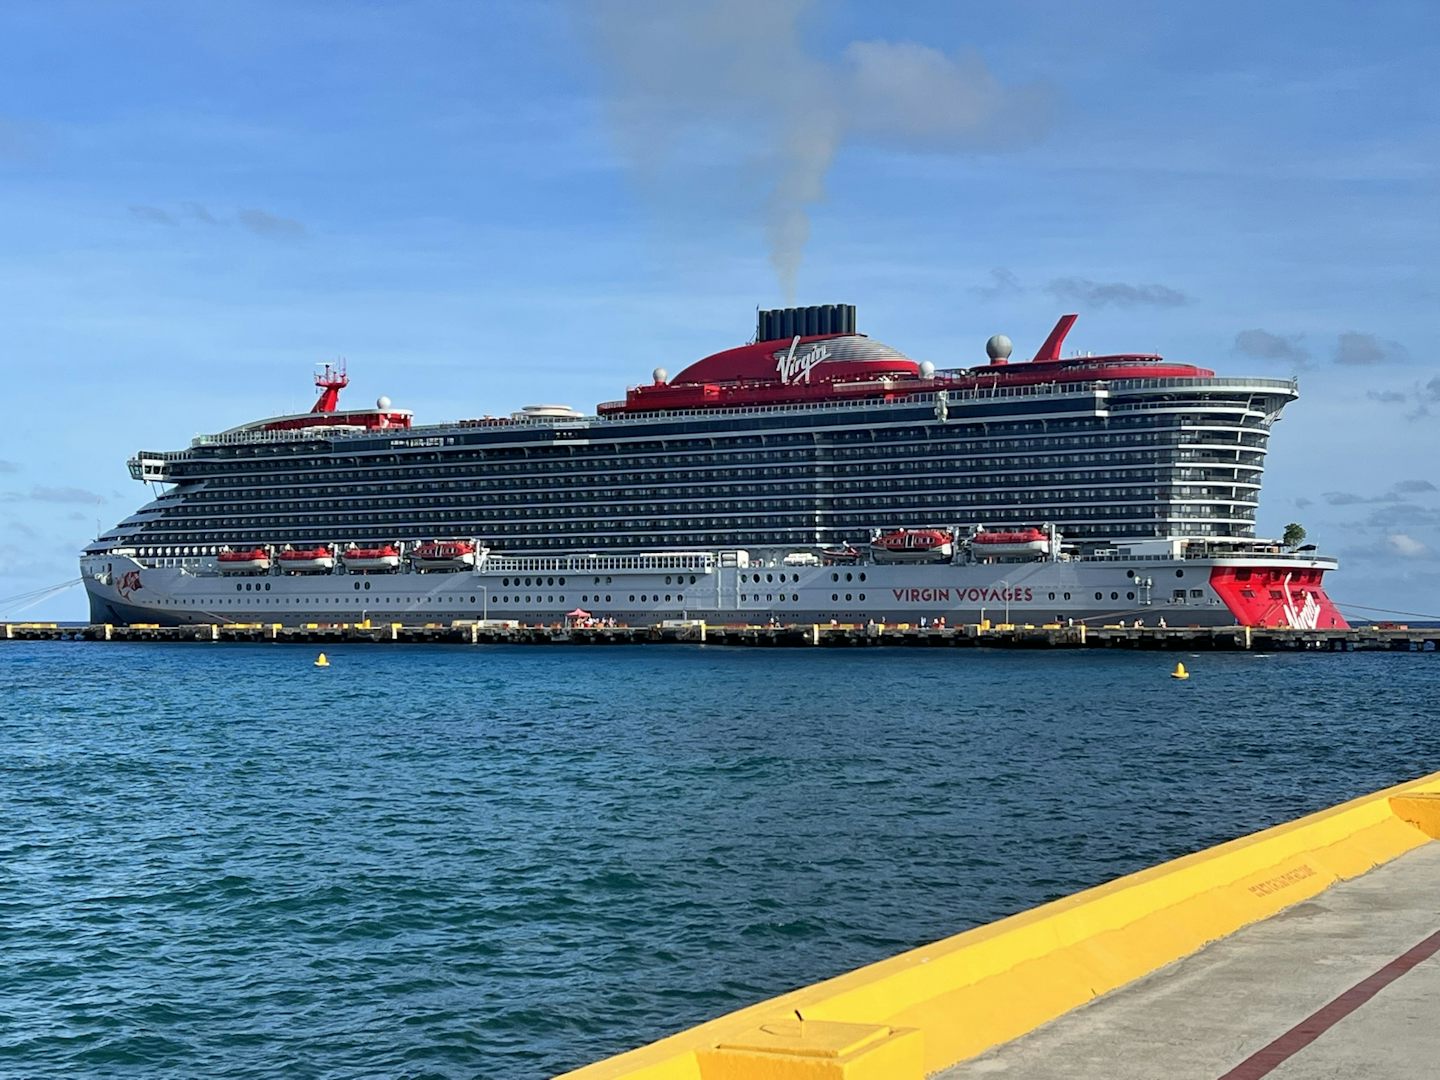 The Scarlet Lady as viewed from the pier at Costa Maya, Mexico.